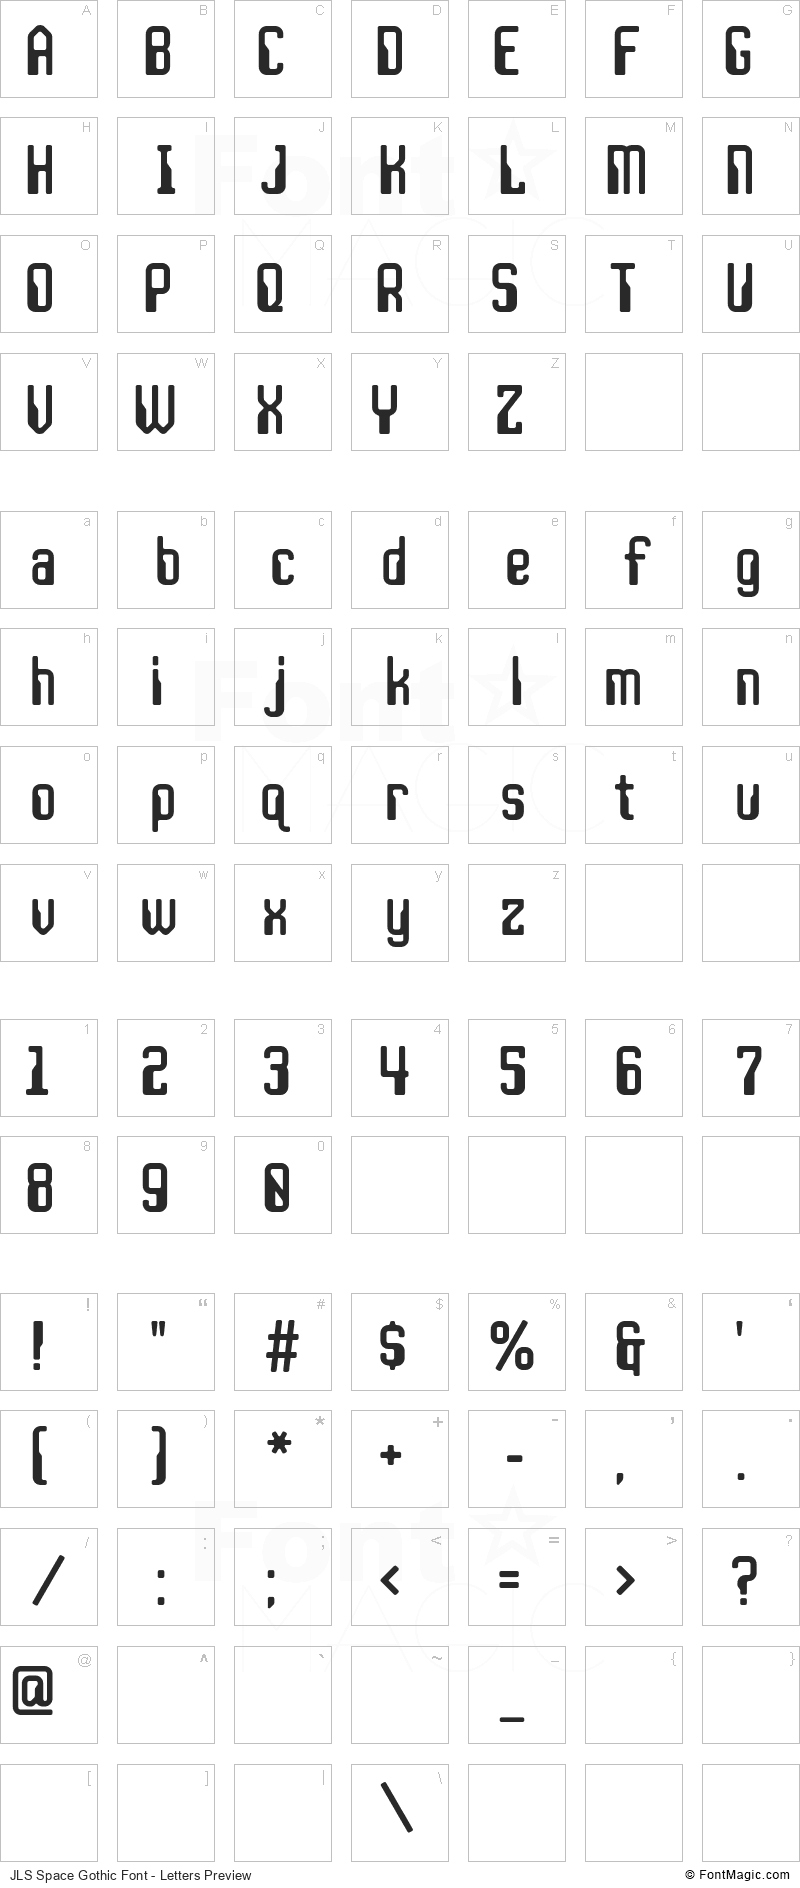 JLS Space Gothic Font - All Latters Preview Chart